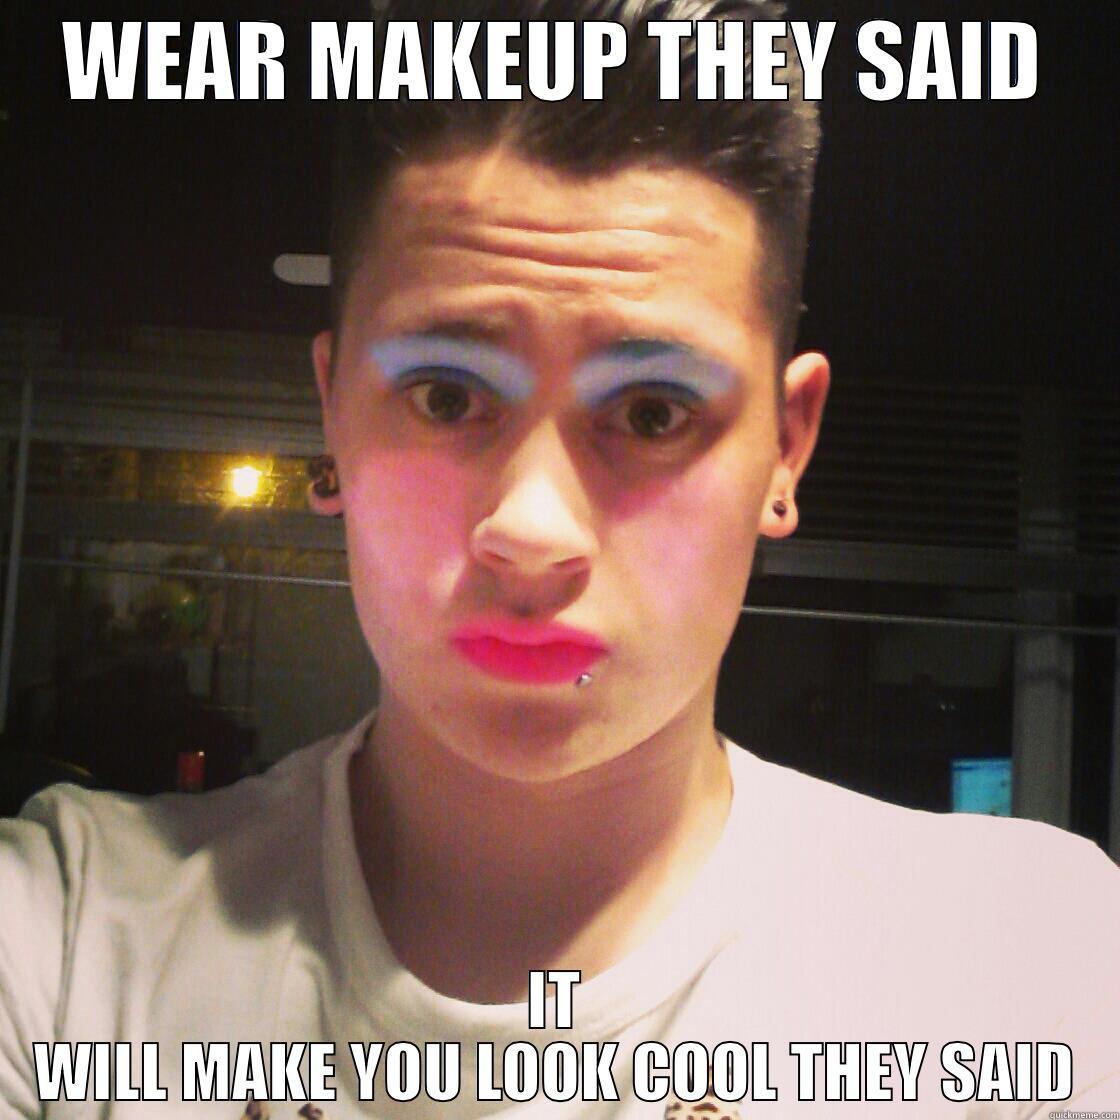 Makeup Boy - WEAR MAKEUP THEY SAID IT WILL MAKE YOU LOOK COOL THEY SAID Misc